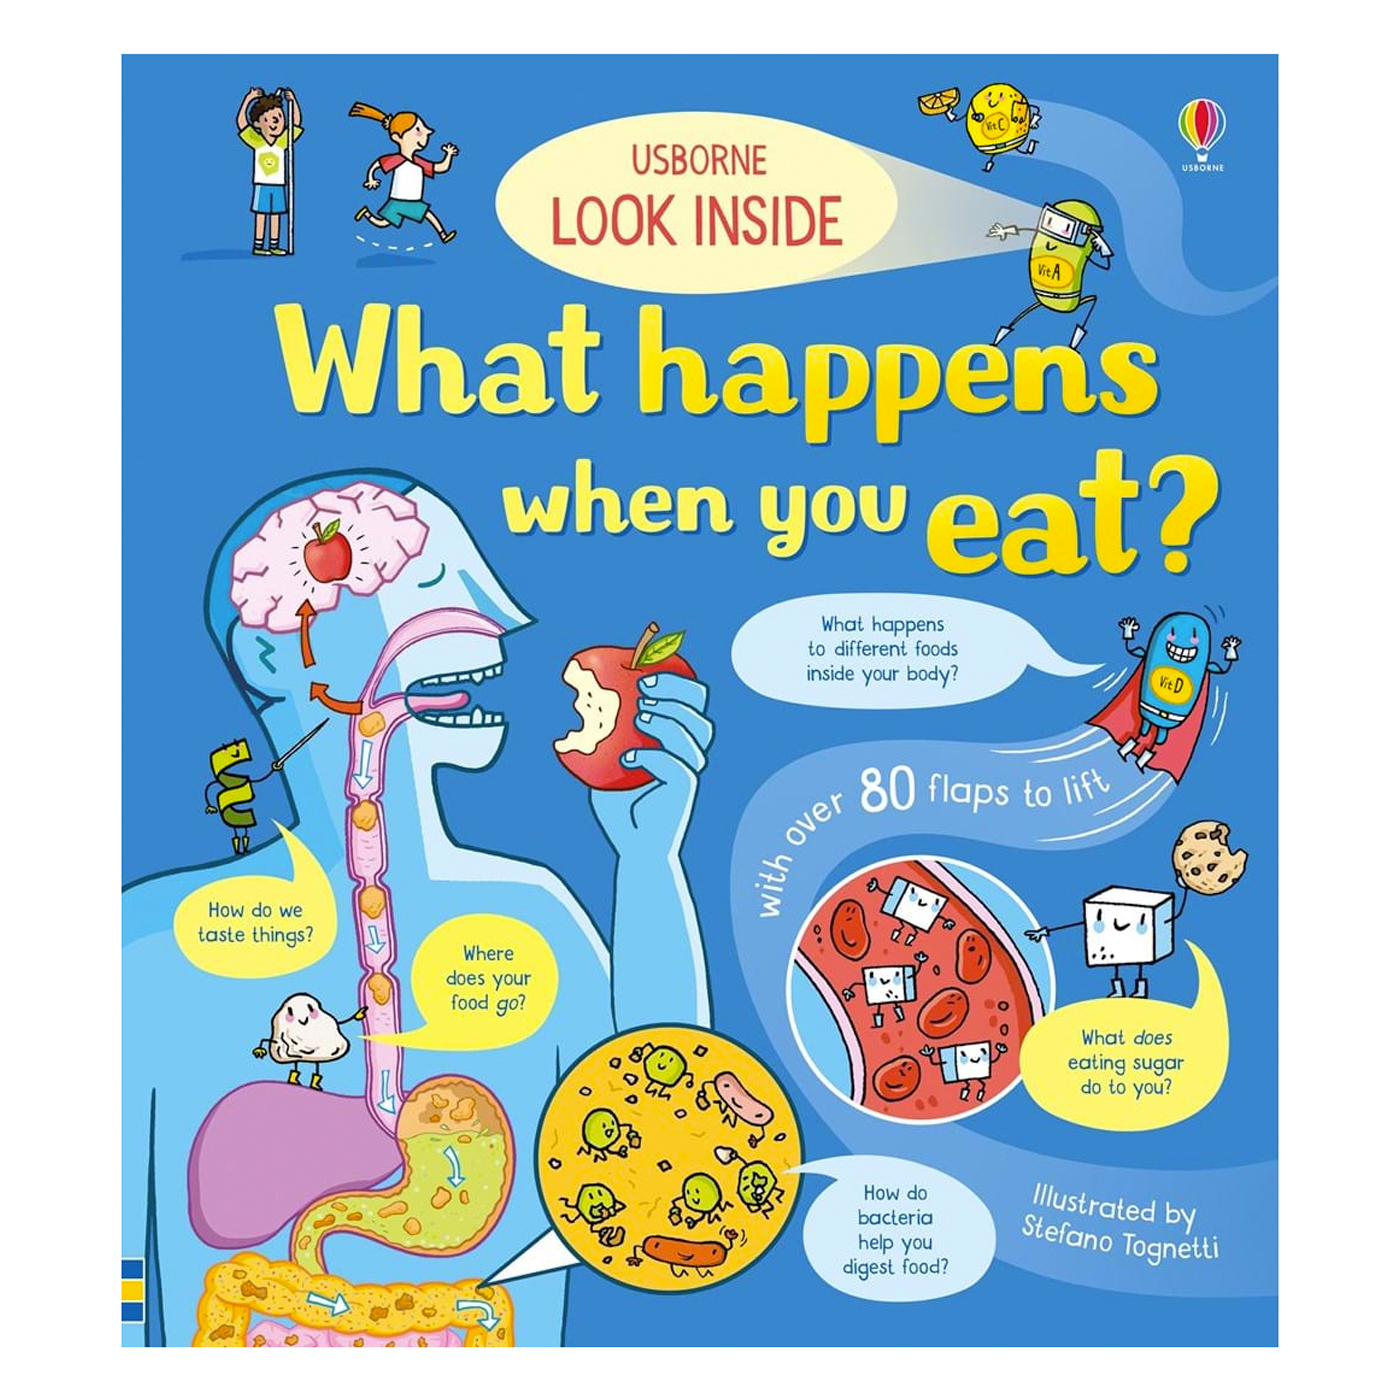  Look Inside: What happens when you eat?